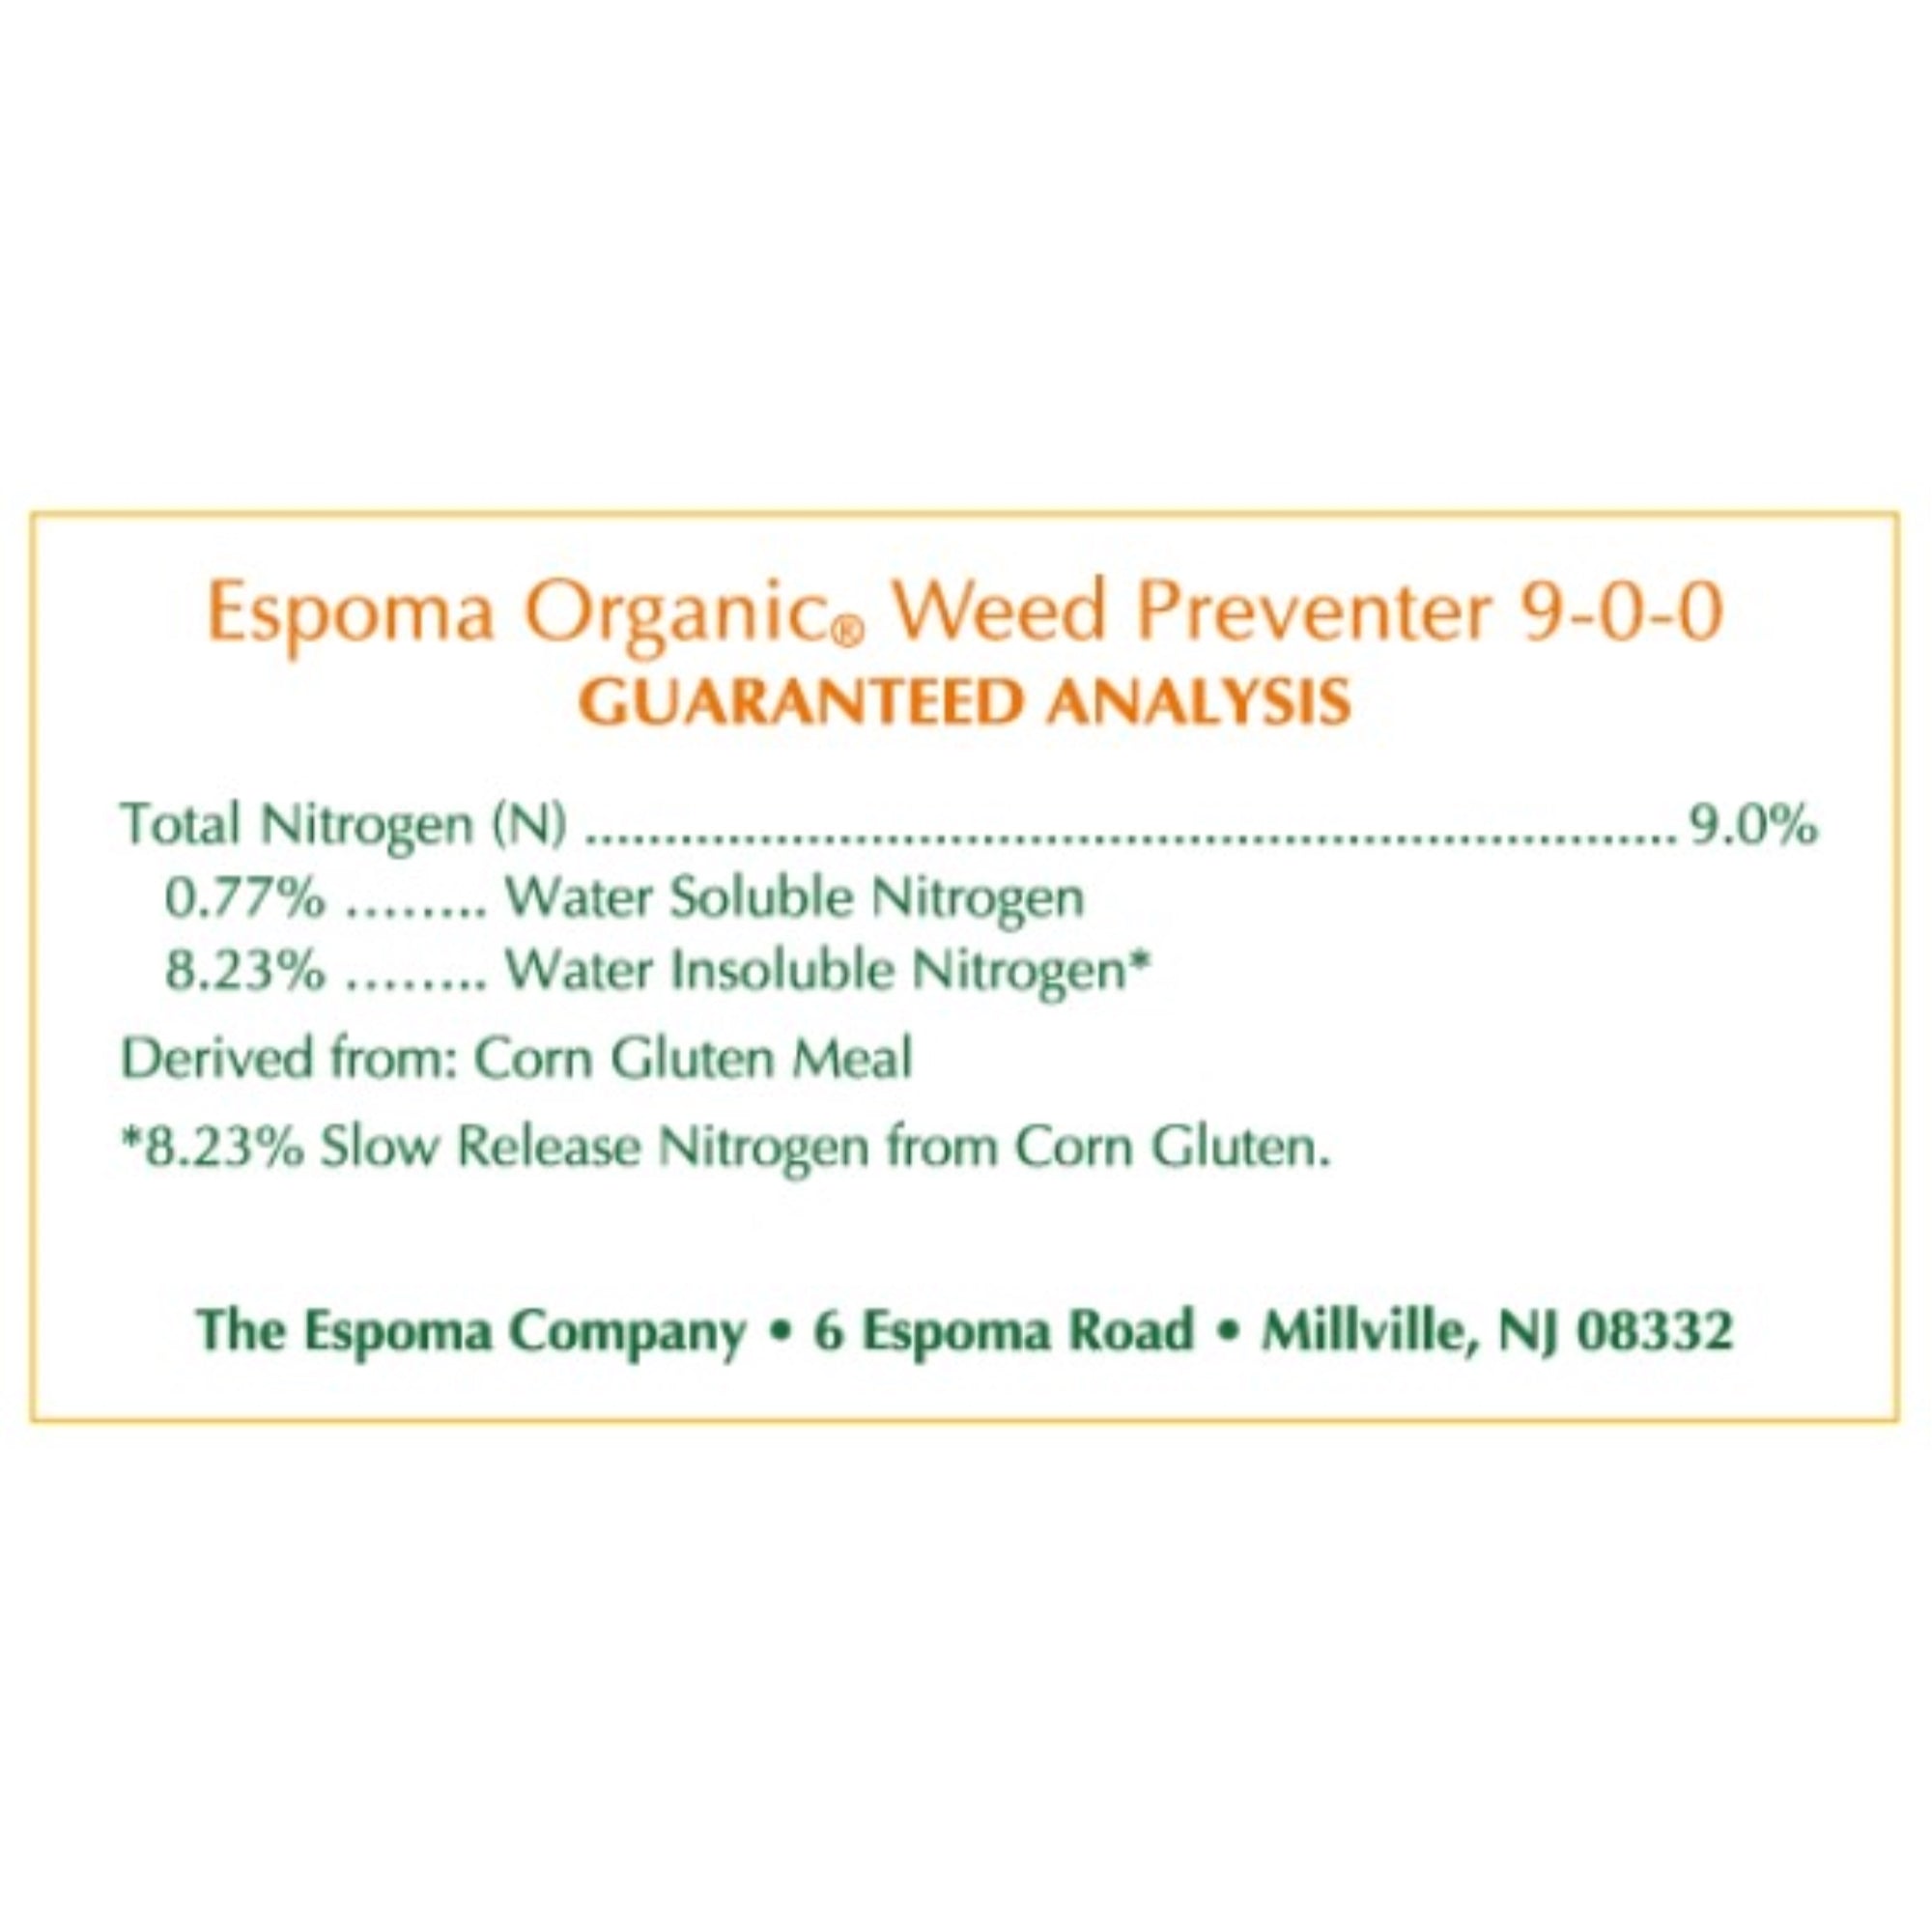 Espoma Organic 9-0-0 All-Natural Weed Preventer, Prevents Weeds & Feeds Lawns, Made from Corn Gluten, 25 lb Bag